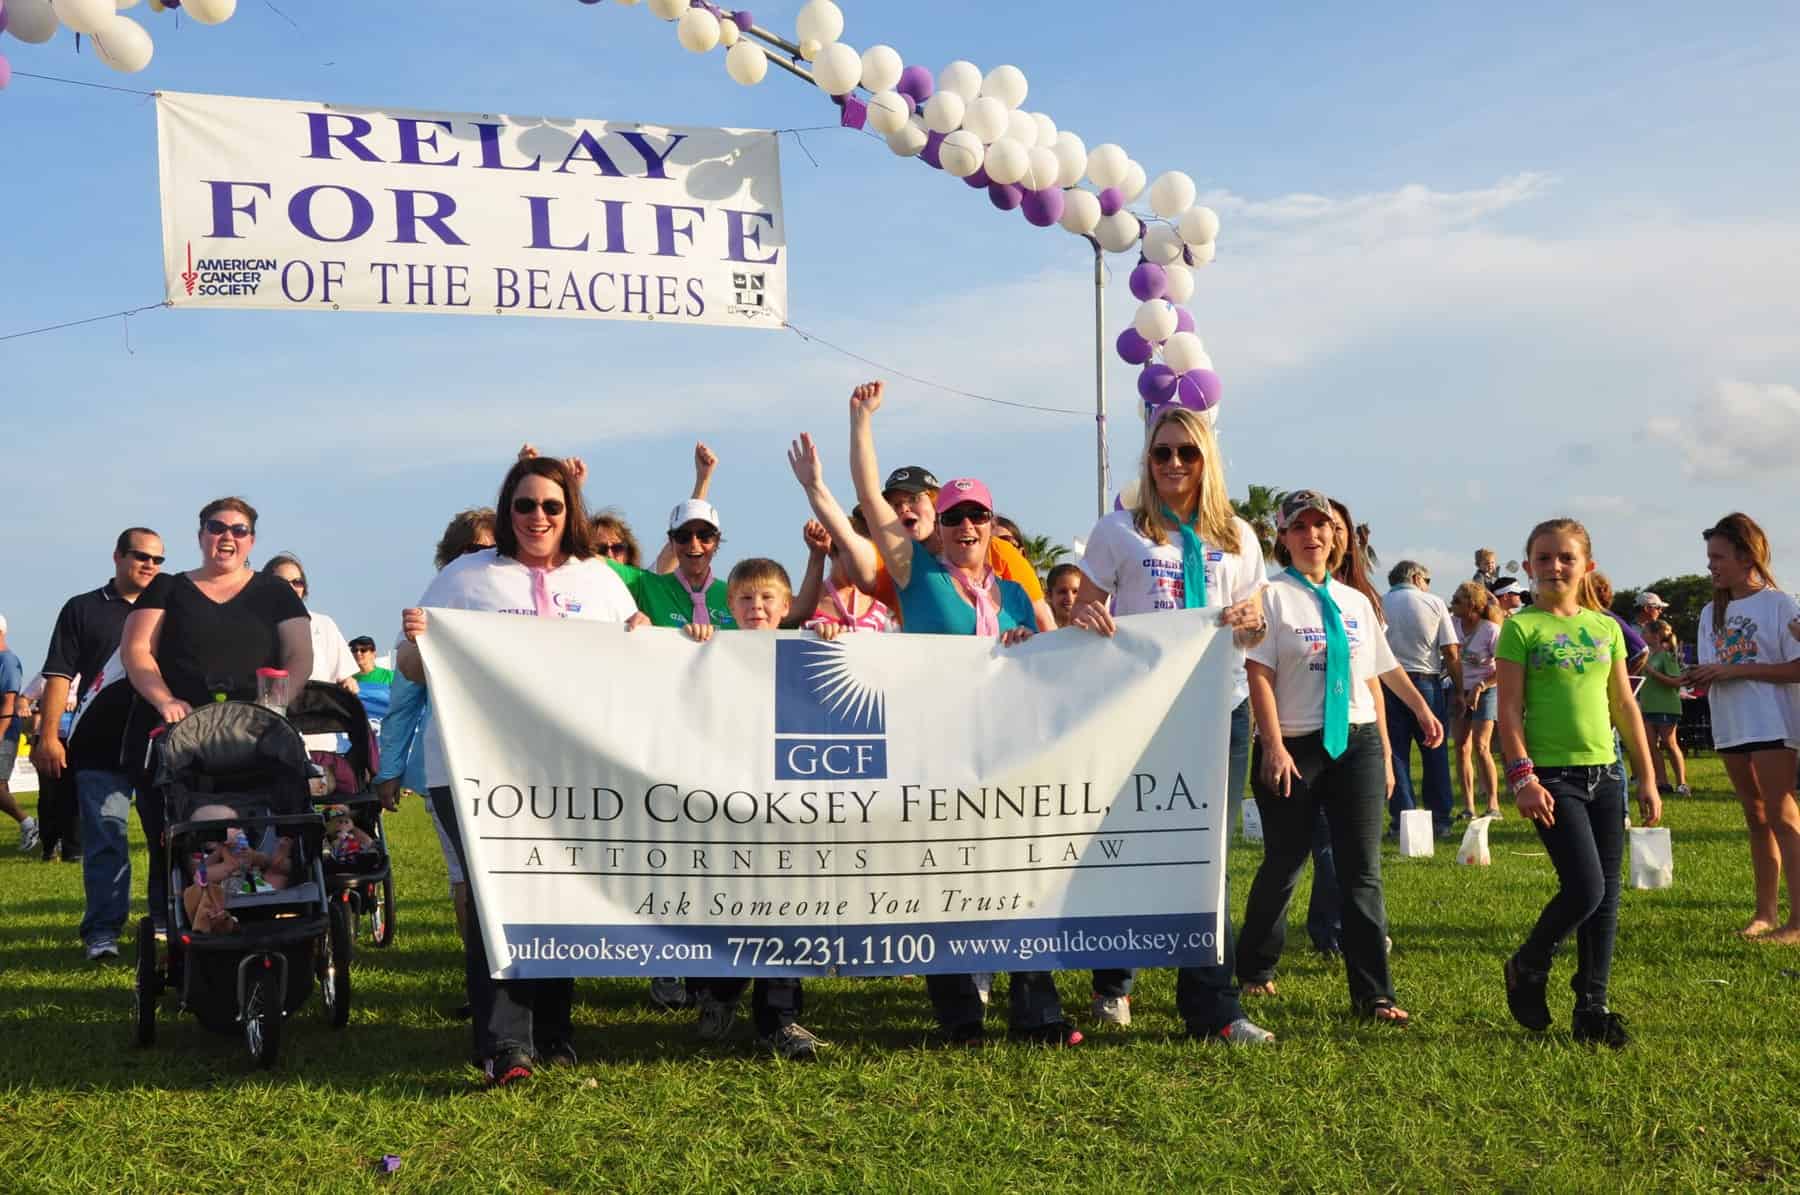 Gould Cooksey Fennell team at the Relay for Life American Cancer Society event